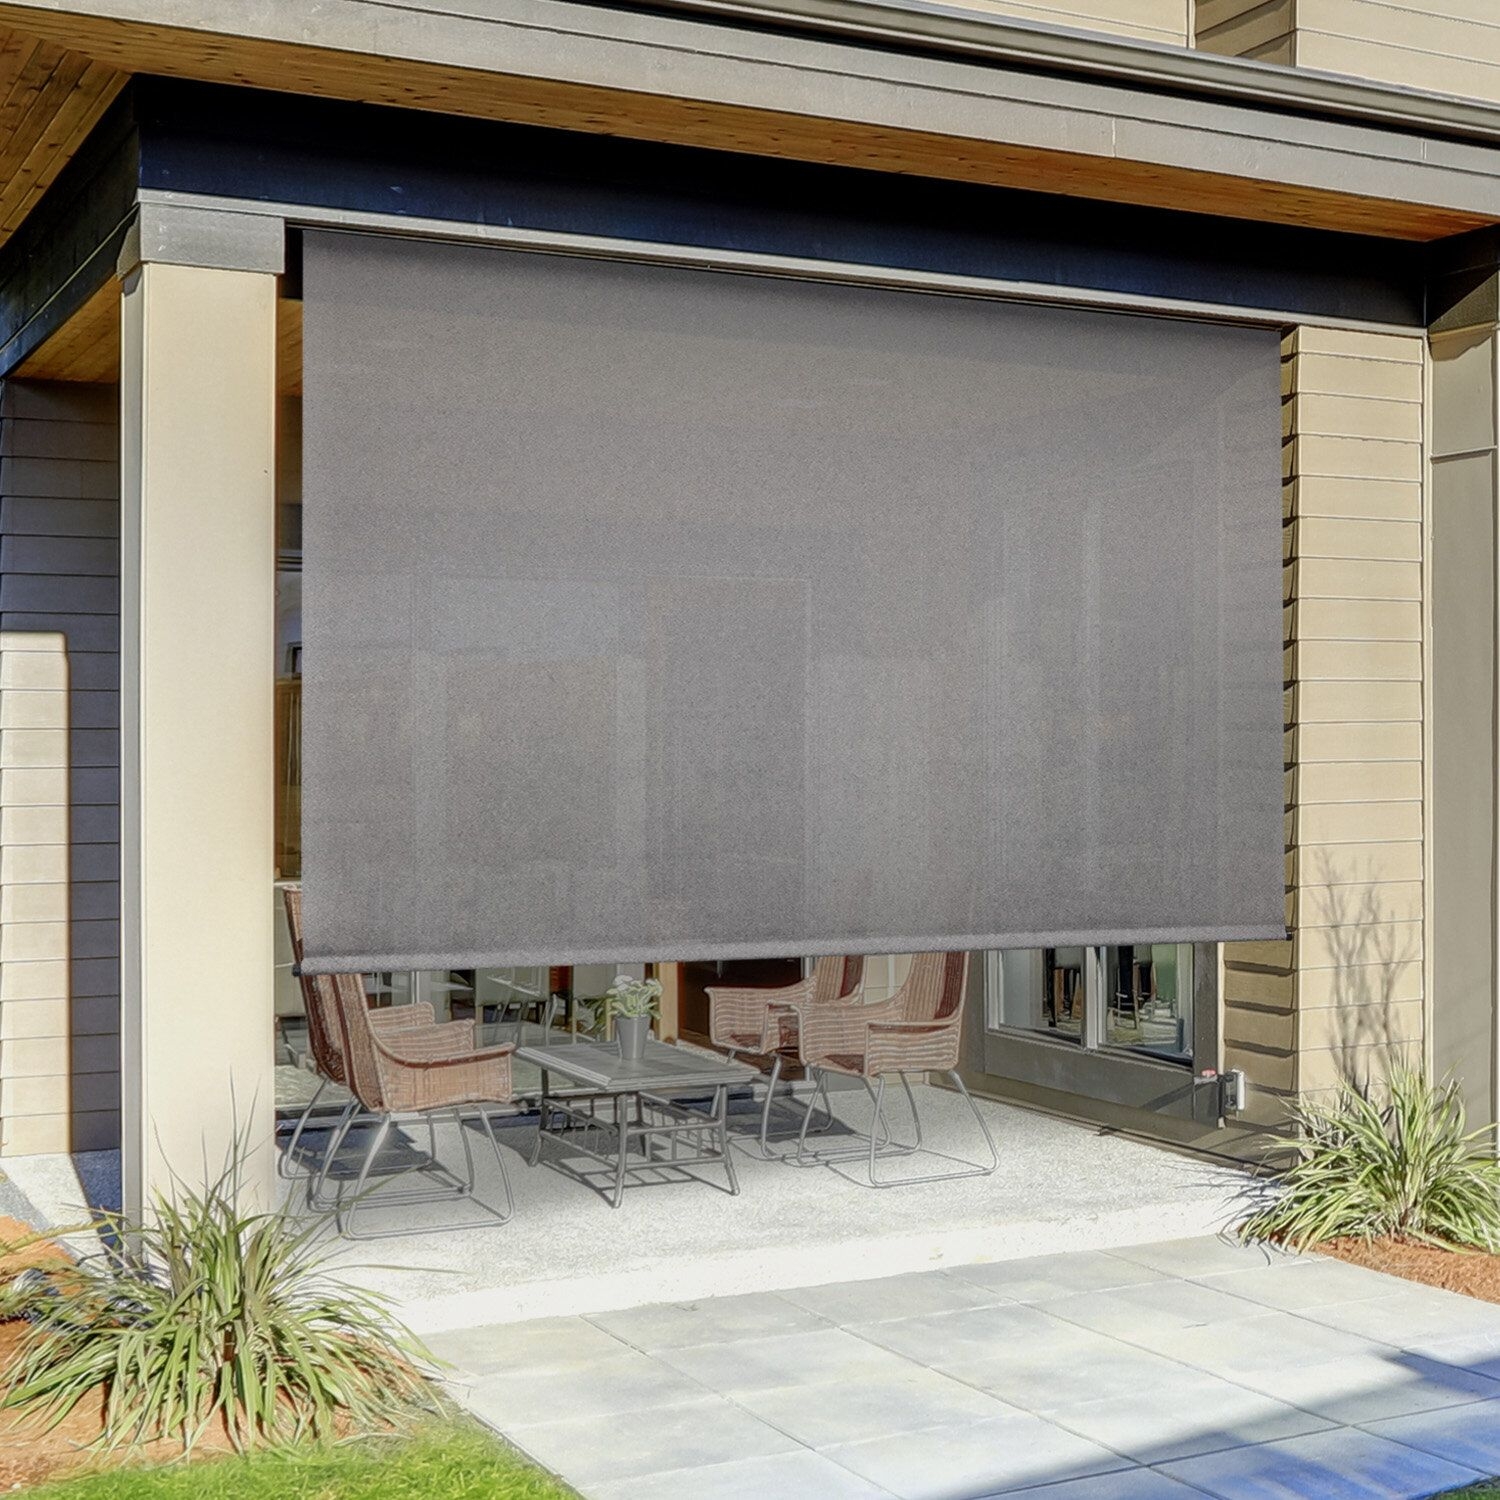 8-Ft Window Sun Shade Blind Roller Roll-Up Exterior Cordless Patio Outdoor Porch 